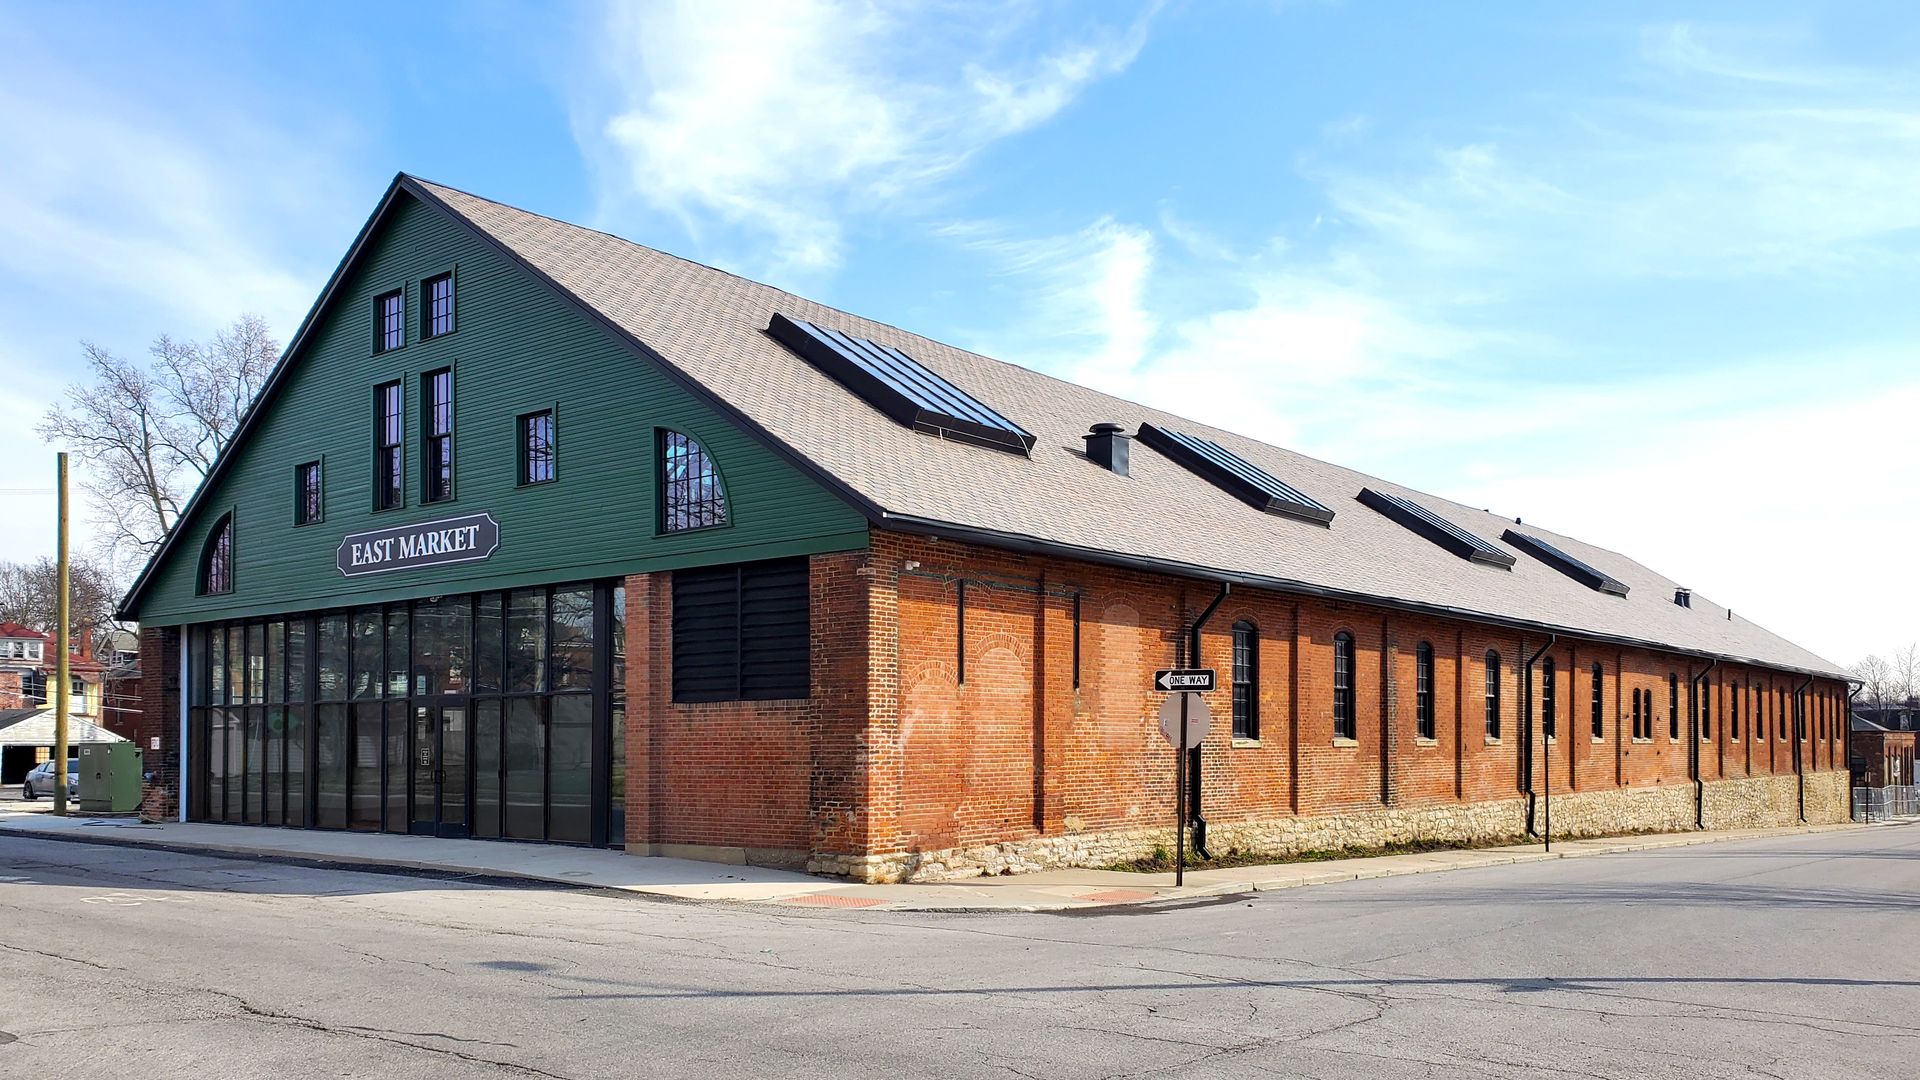 The Oak Street side of East Market, a brick building with a green painted facade